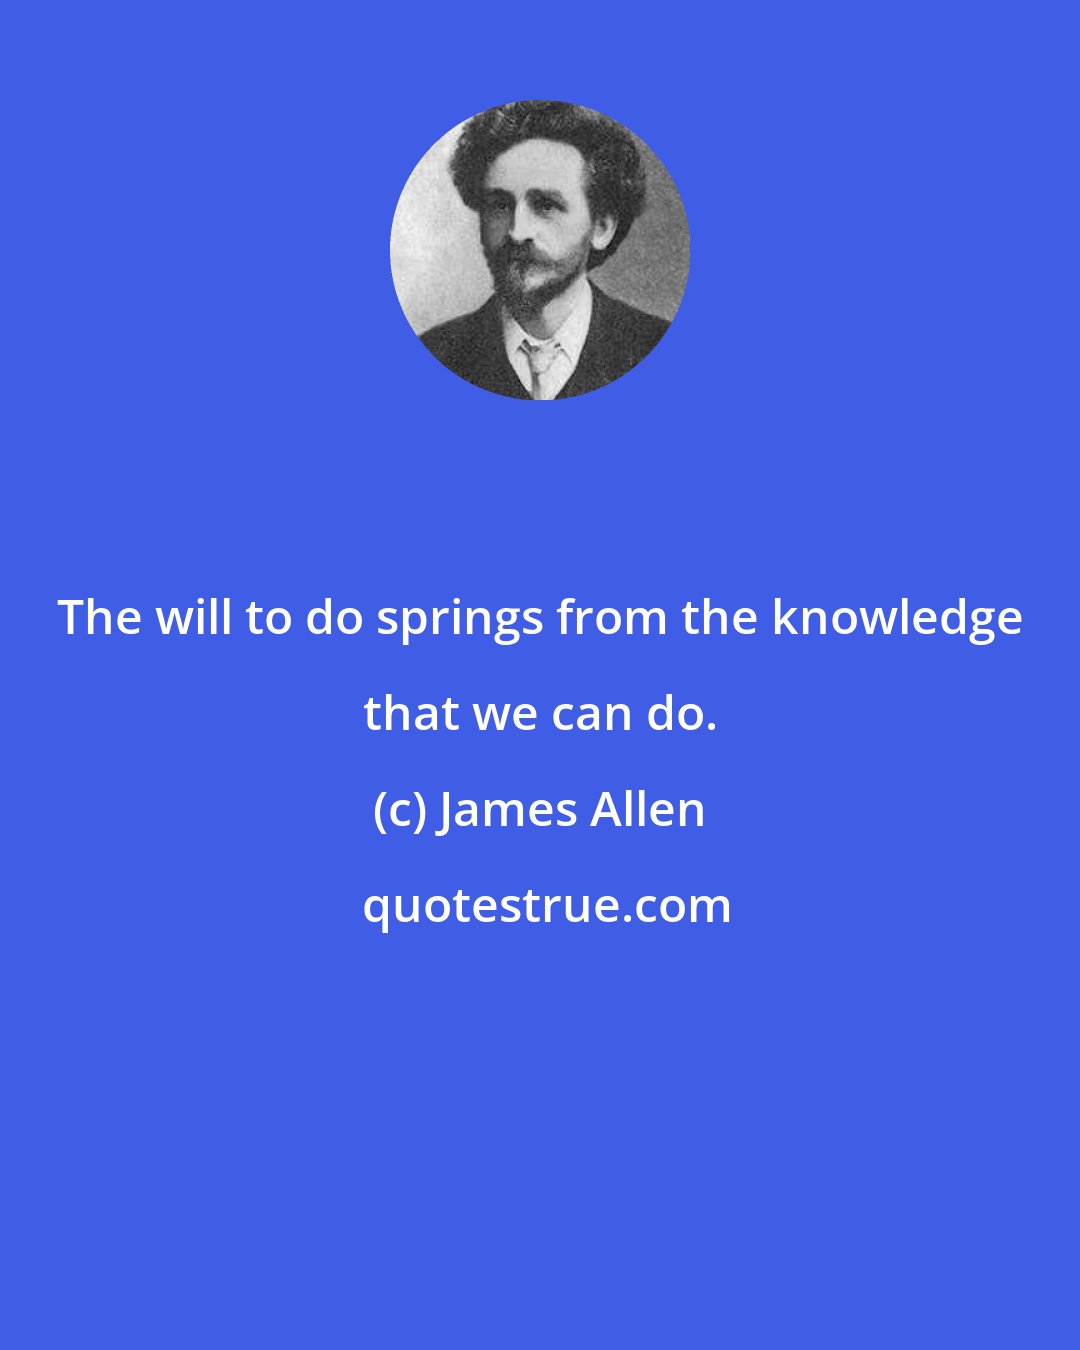 James Allen: The will to do springs from the knowledge that we can do.